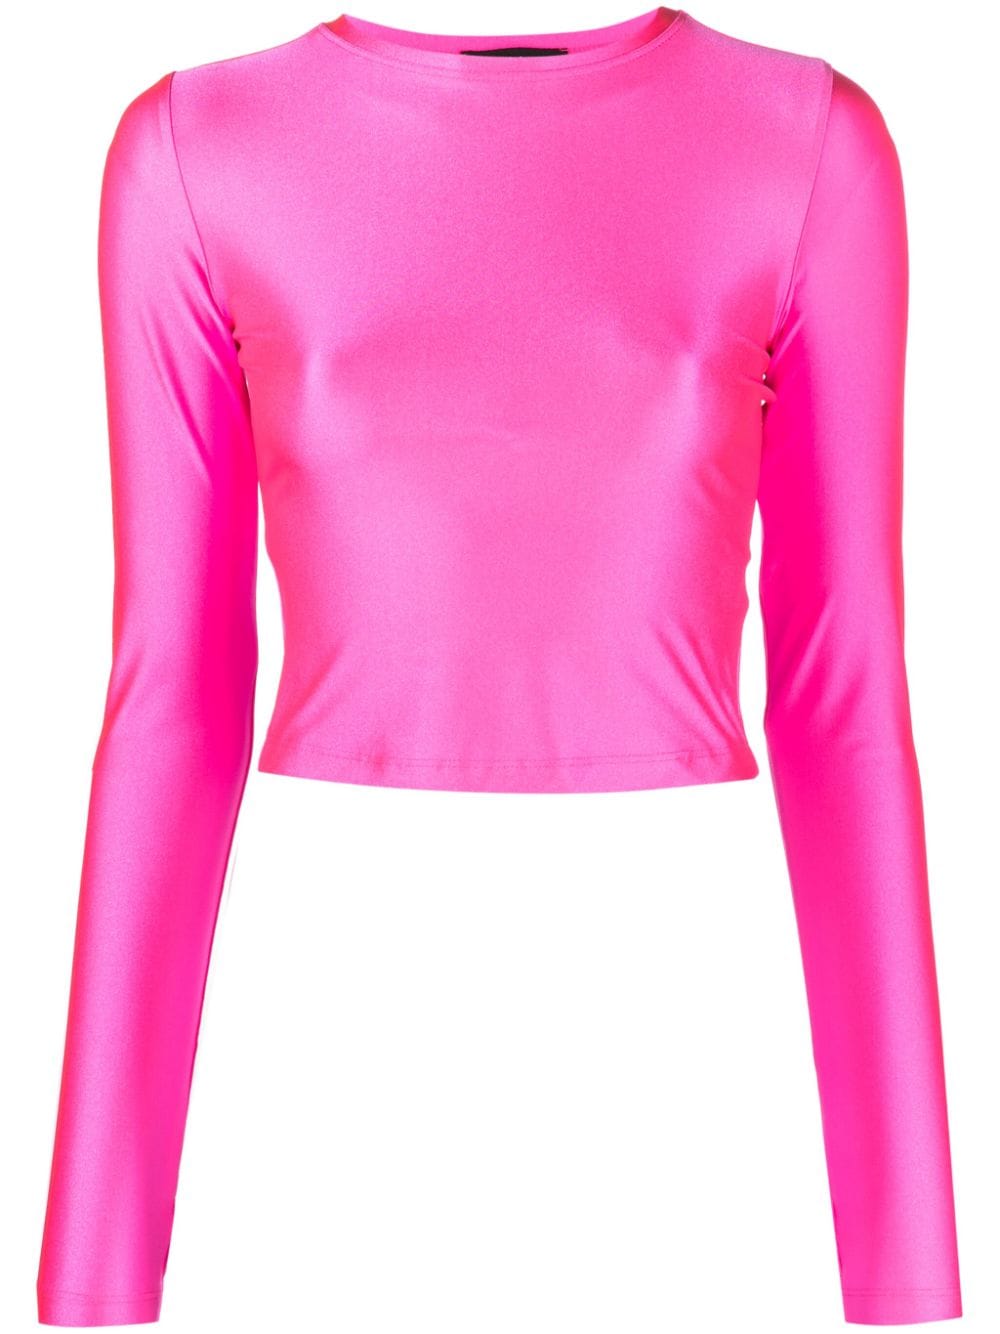 STYLAND long-sleeve cropped T-shirt - Pink von STYLAND